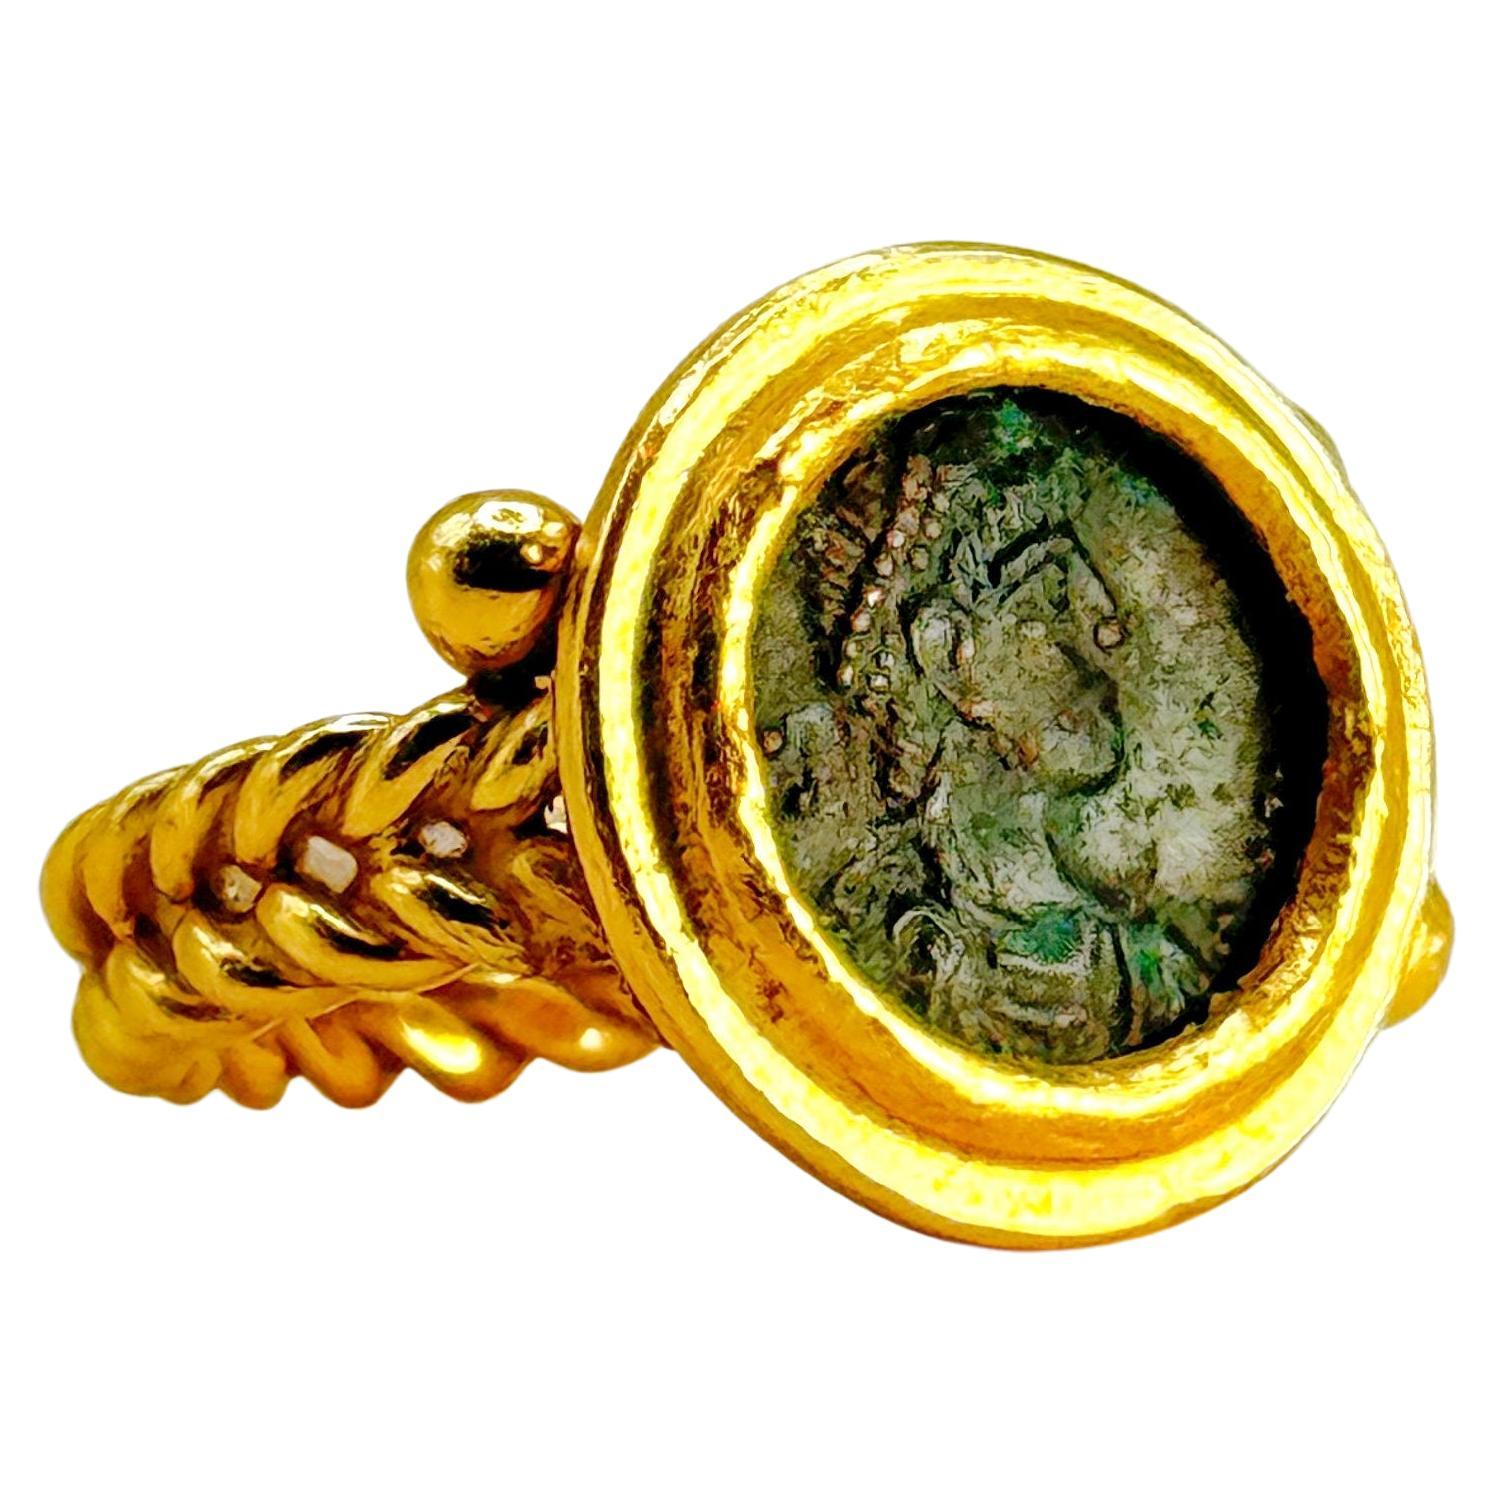 Rare 21K Gold Antique Ring with Alexander the Great Roman Coin - Unique Historic For Sale